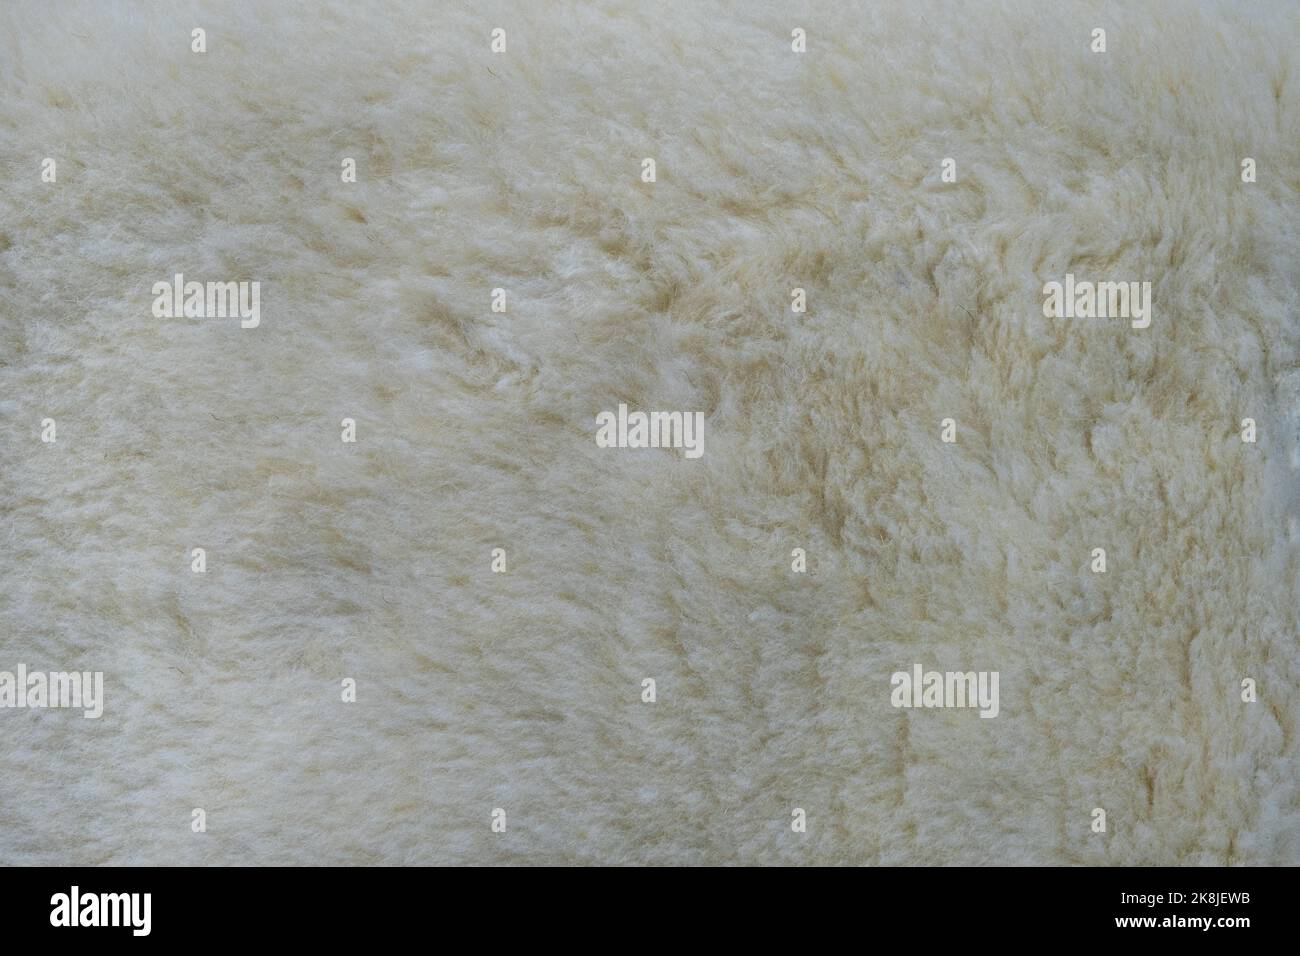 Background close-up of skins with ram fur. Stock Photo